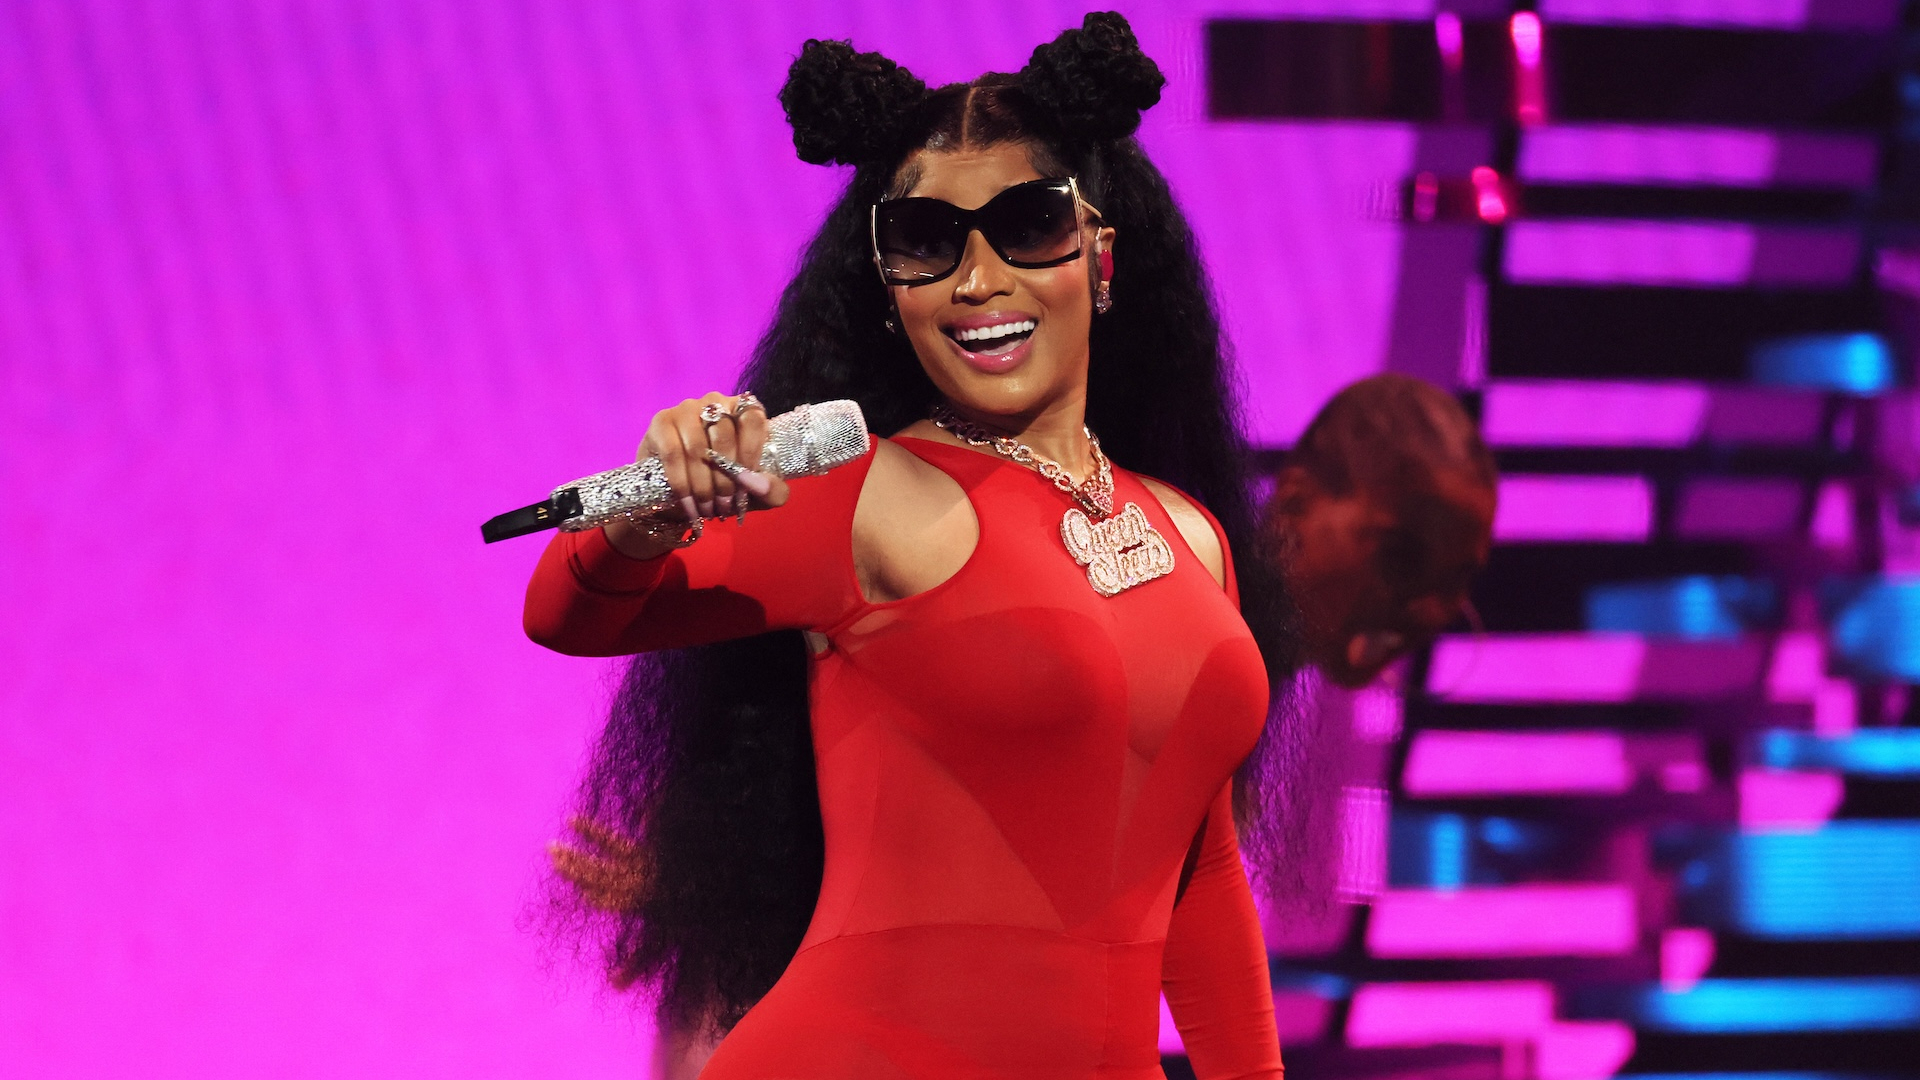 Nicki Minaj Is Still the HighestSelling Female Rapper Ever Marie Claire